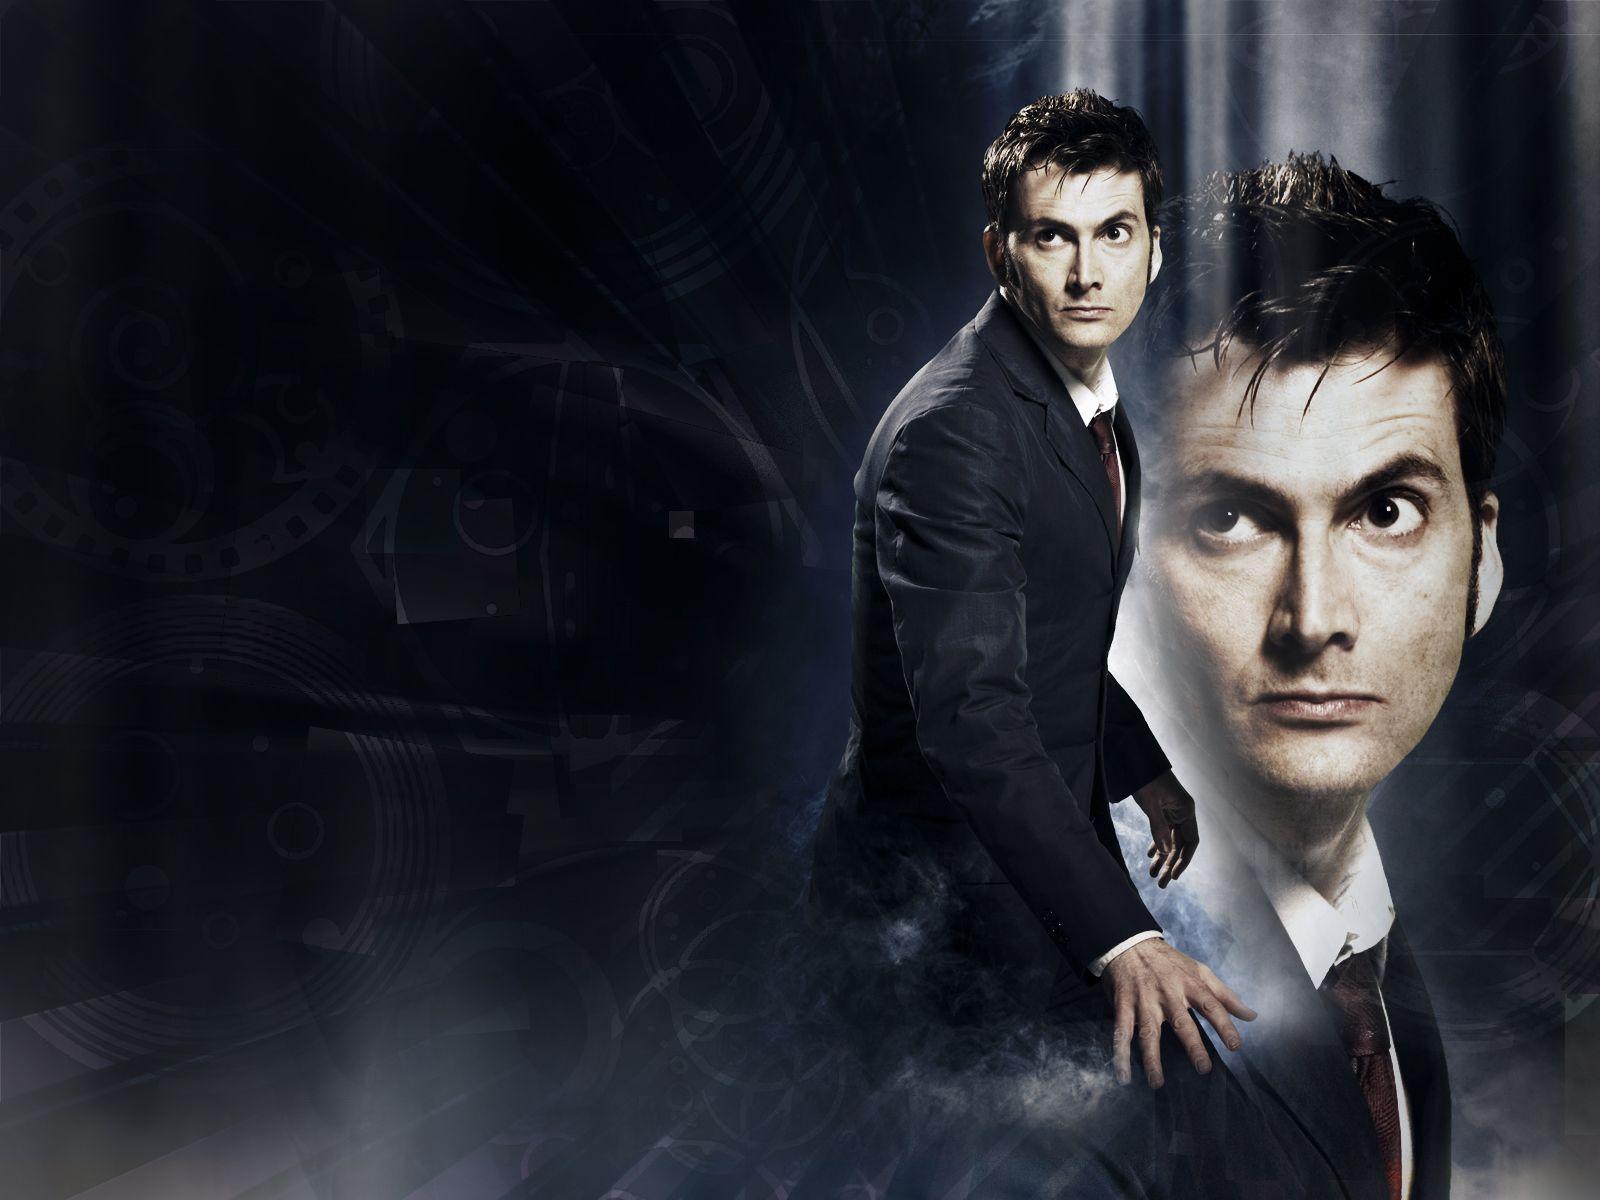 The Lonely Angel–Superhero. David tennant, 10th doctor and Tenth doctor